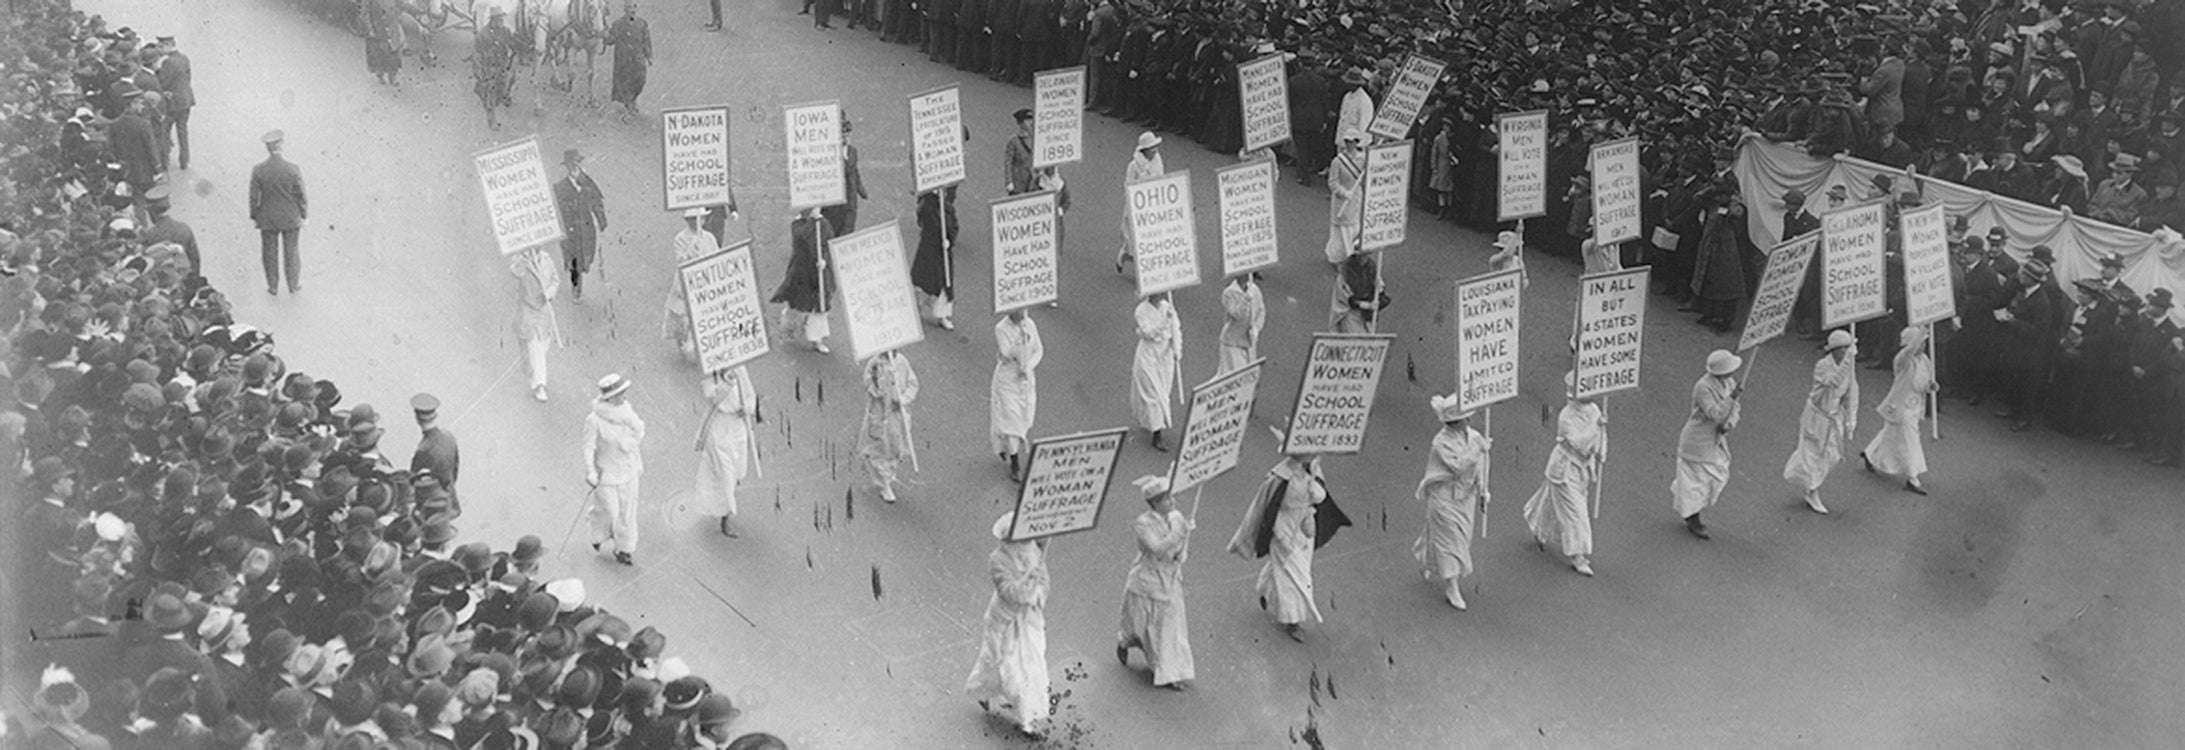 100 Years of Women's Suffrage: A look back at the movement